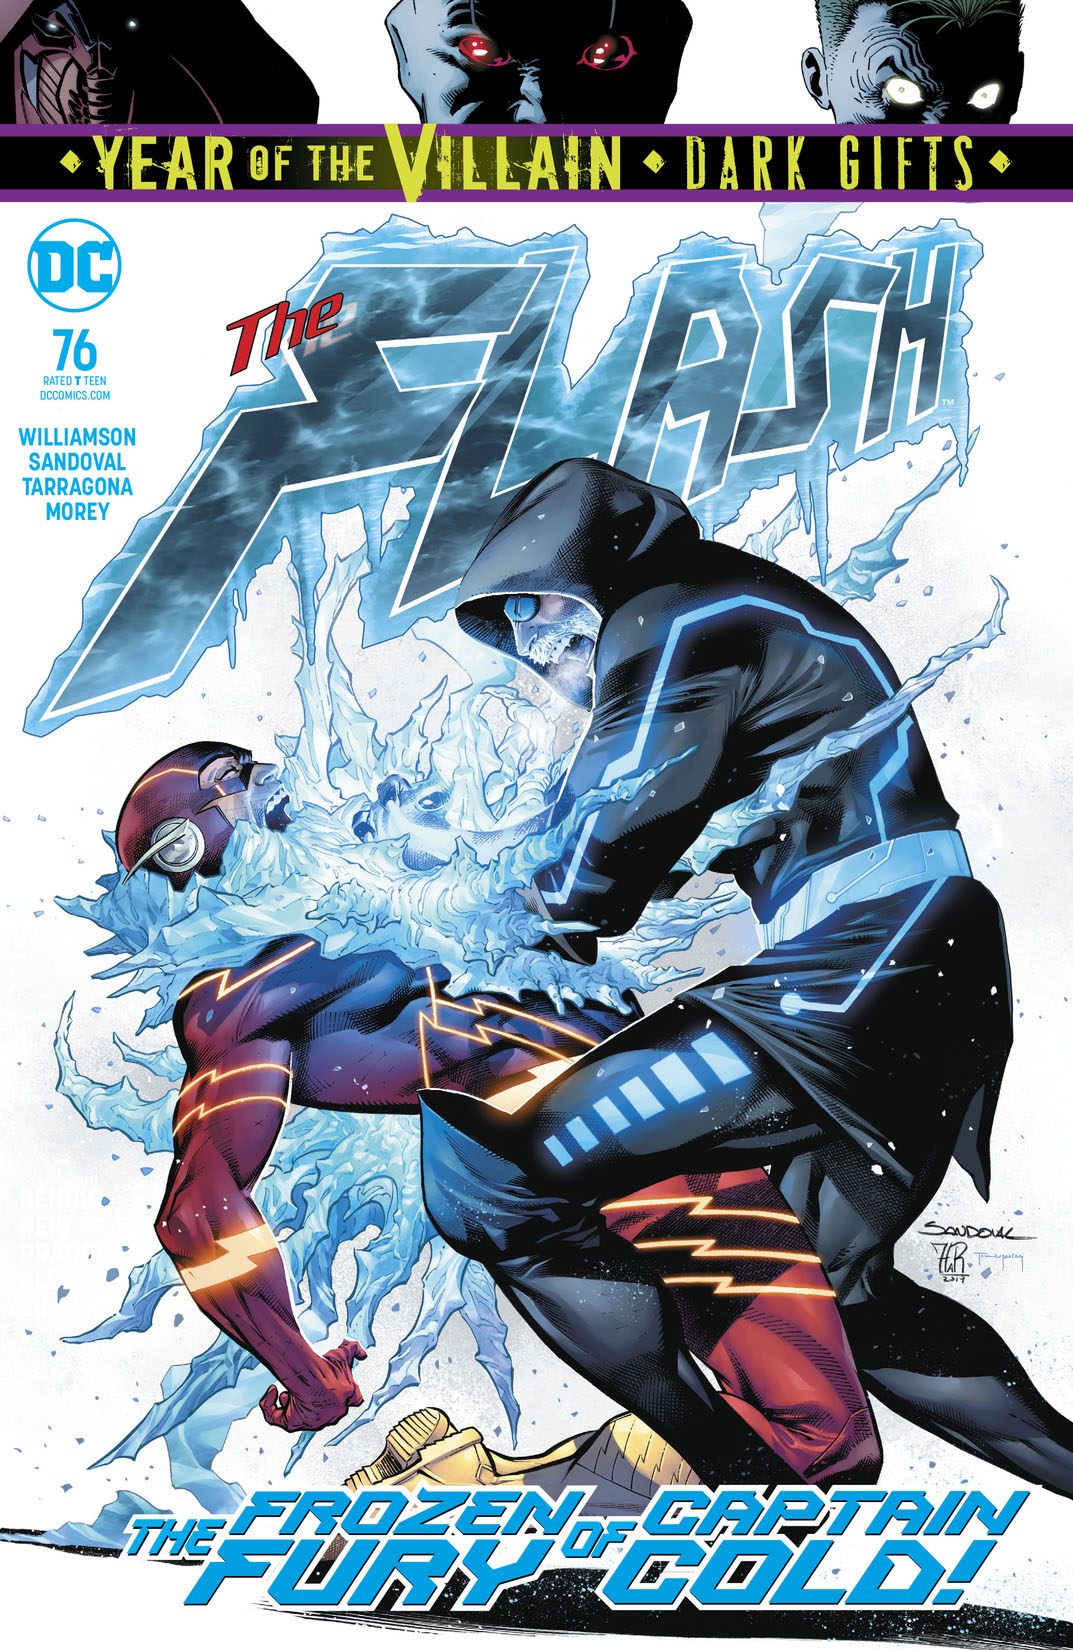 The Flash (2016-) #76 preview images